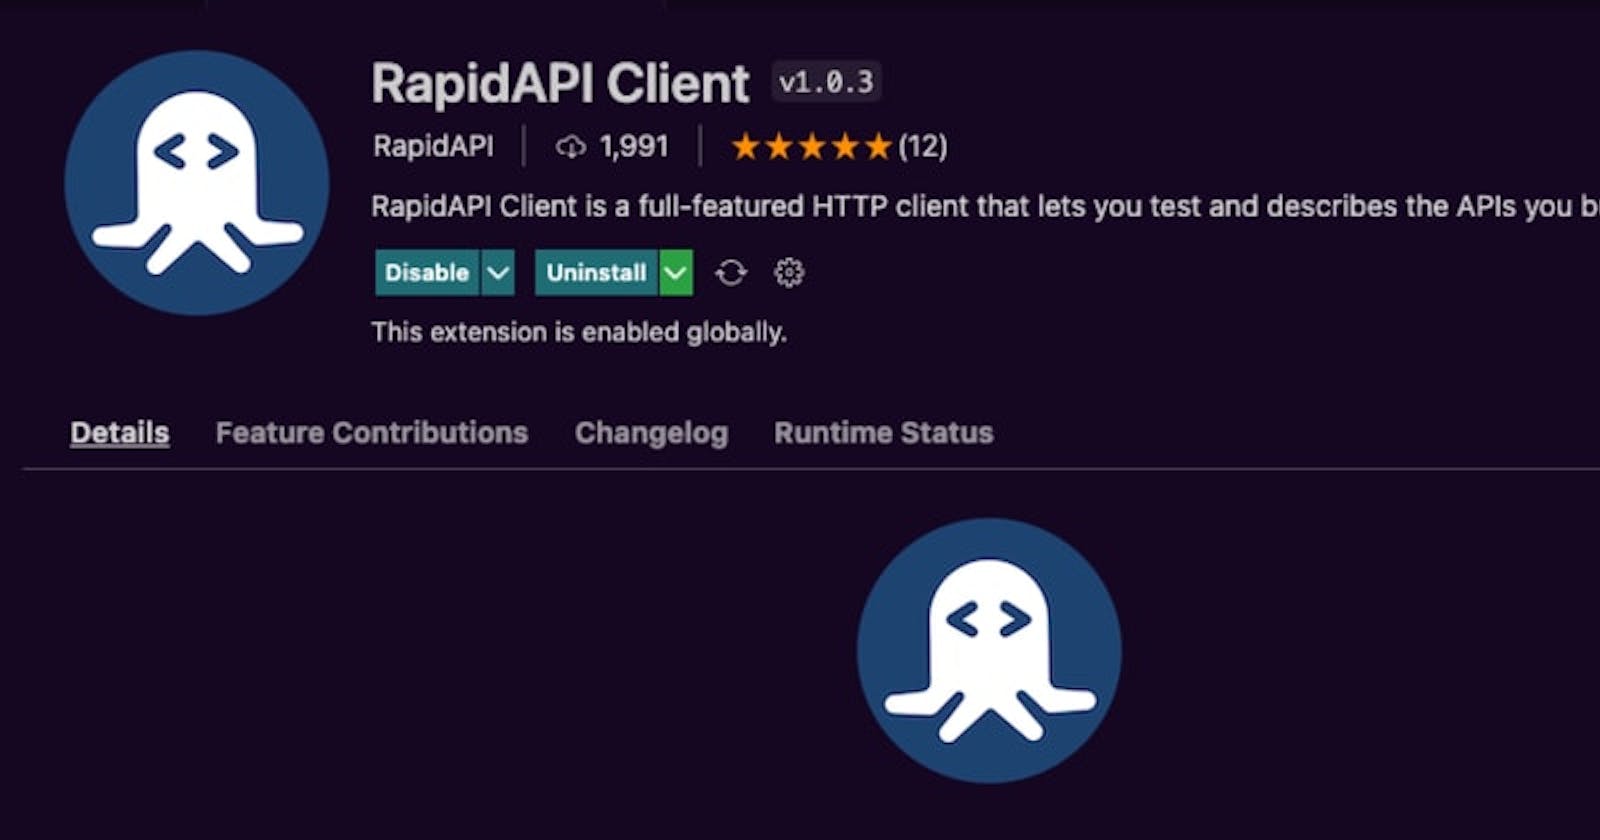 VS Code Tip of the Week: The RapidAPI Client Extensions